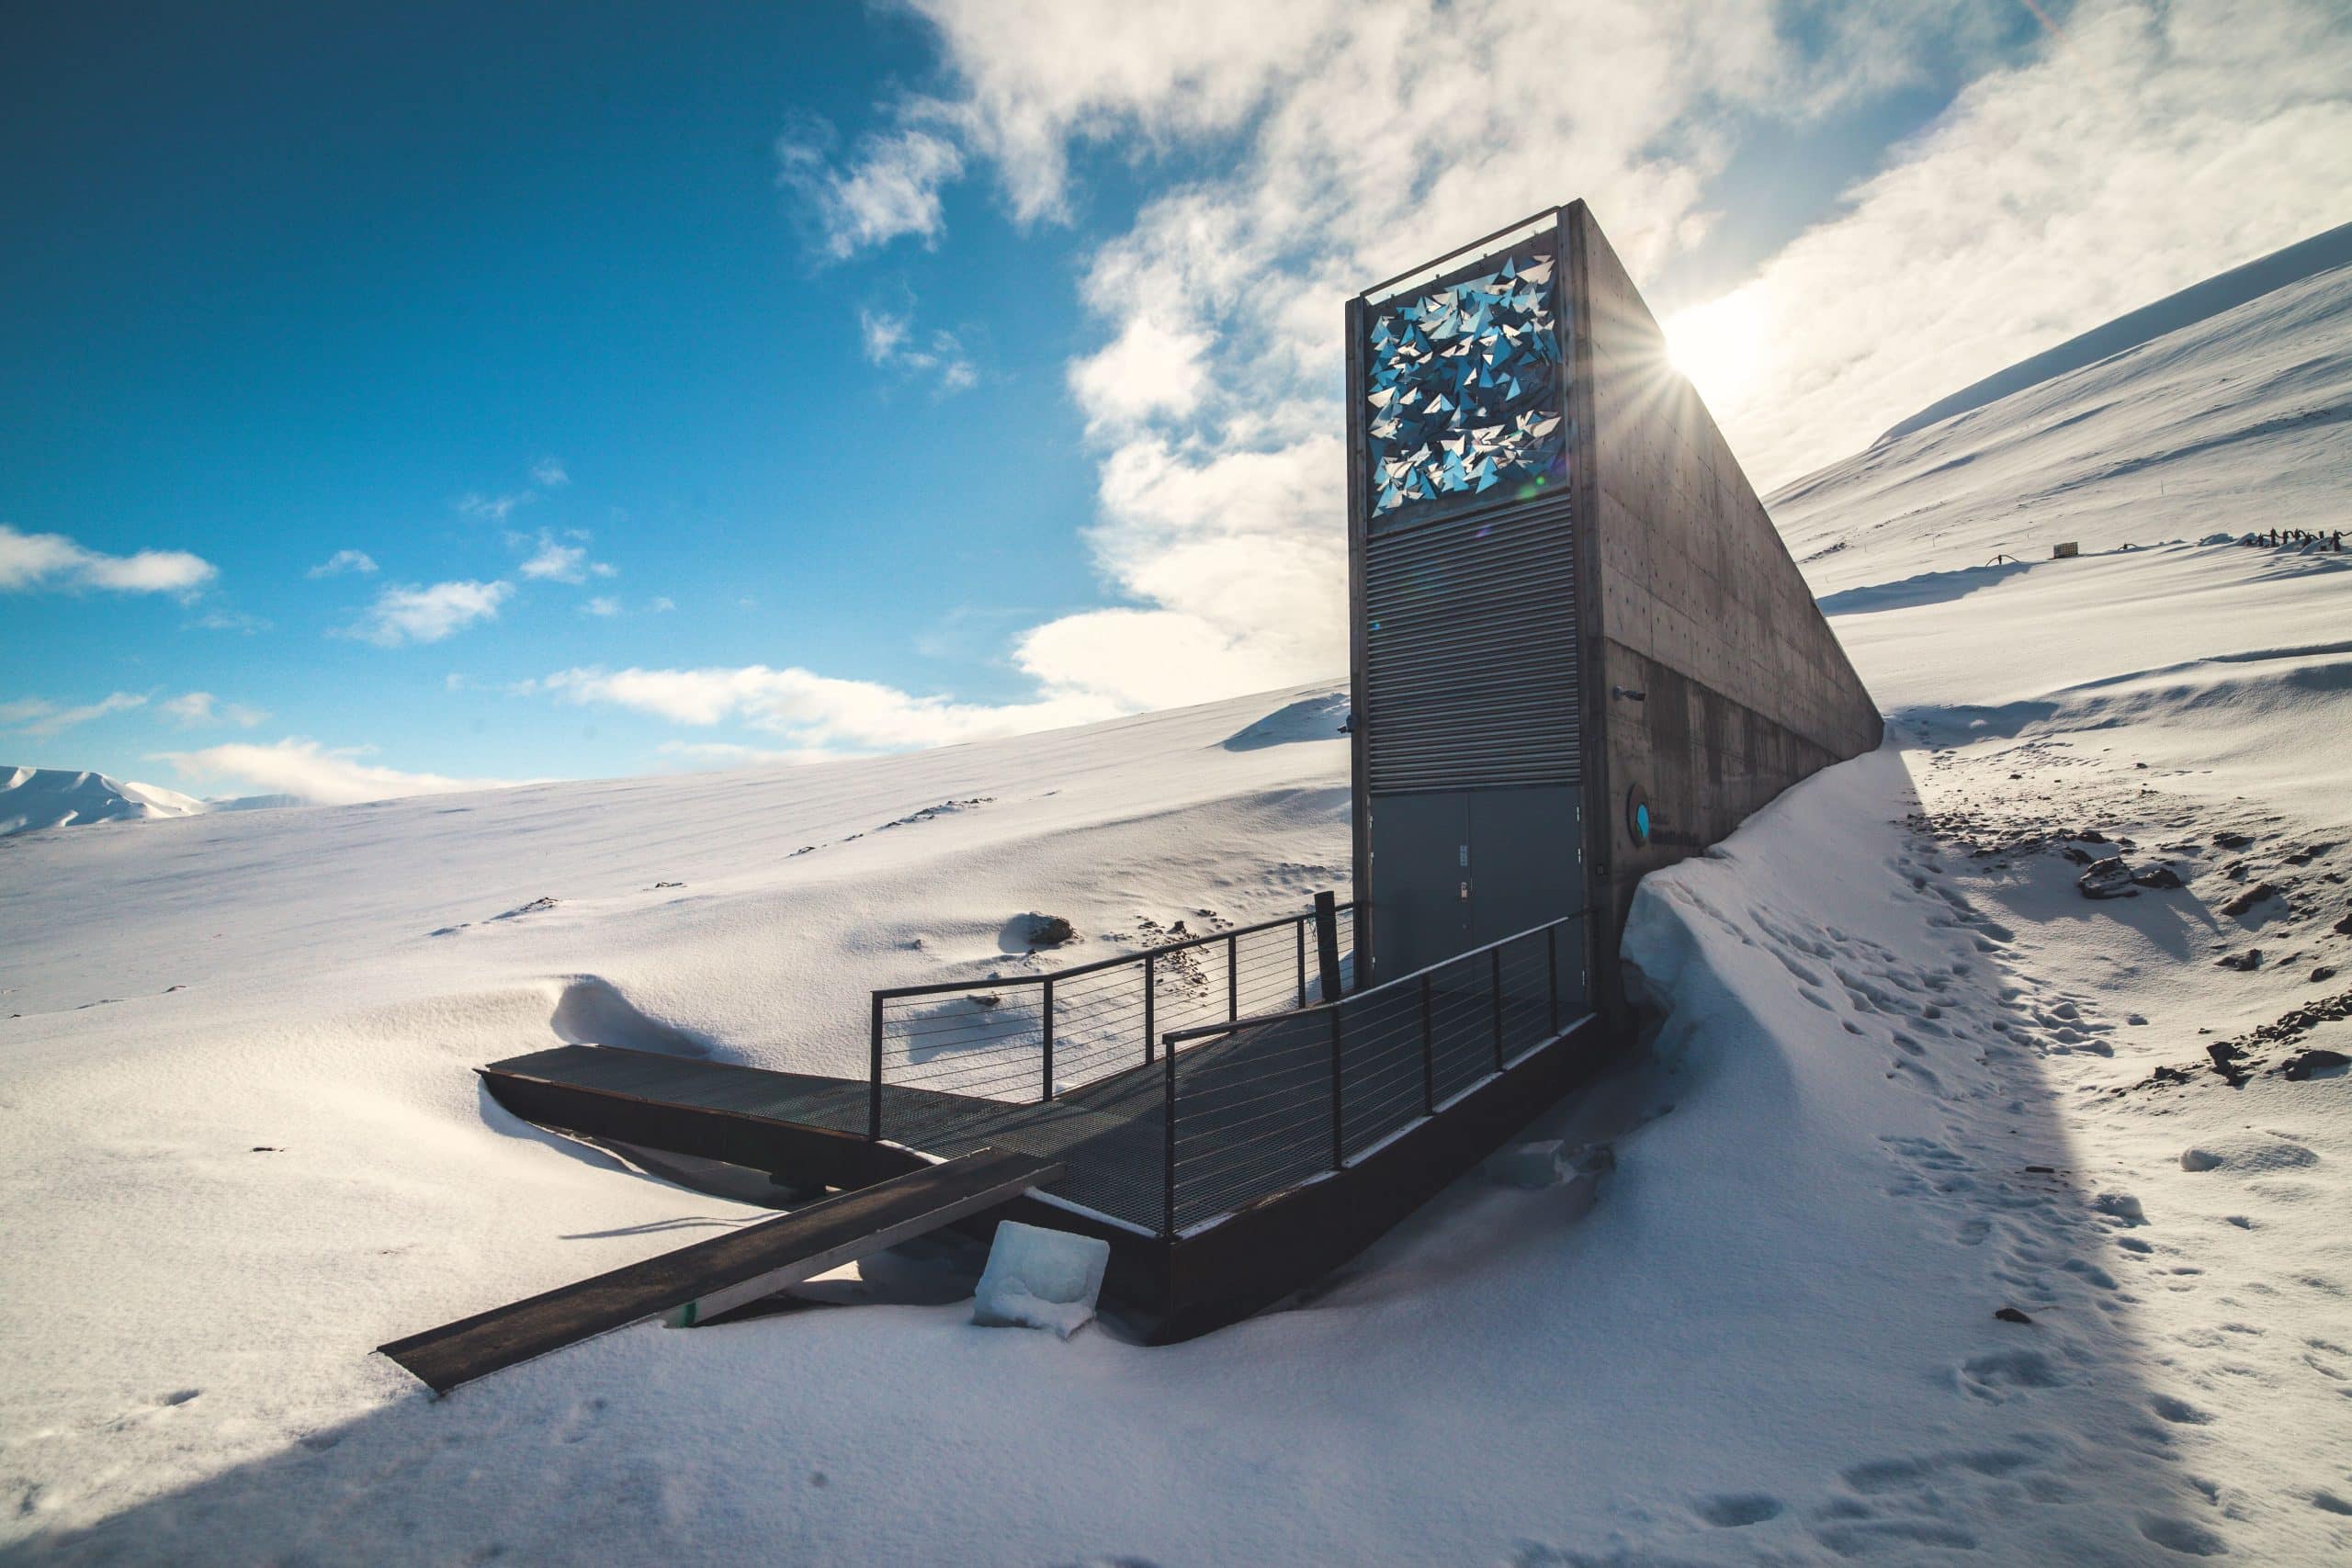 Svalbard: The Doomsday Seed Vault, And What’s Inside